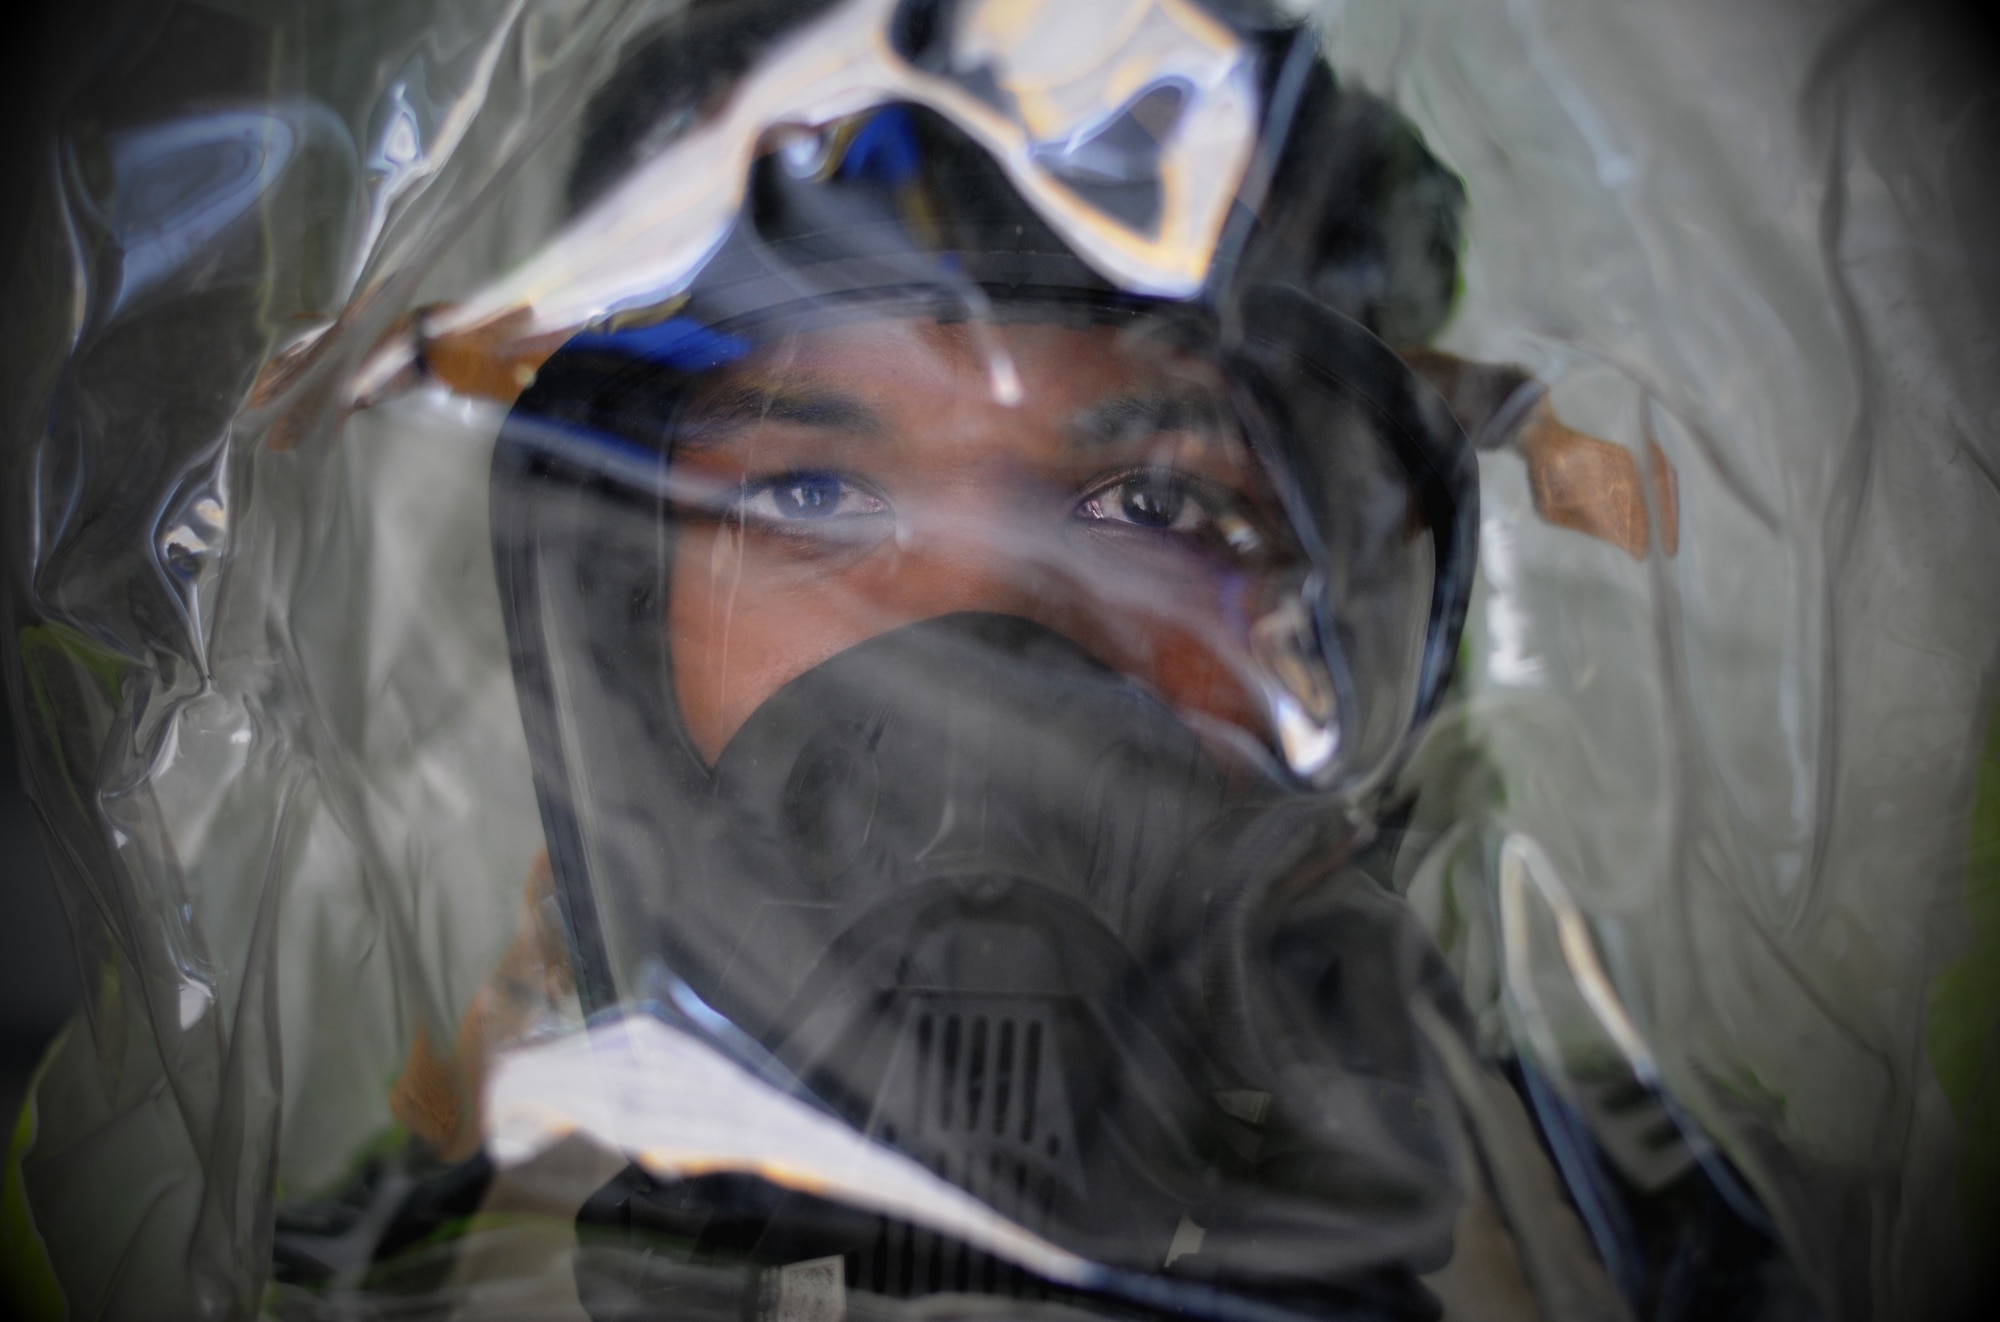 Senior Airman Devin Harris, 81st Aerospace Medicine Squadron bioengineering technician, poses for a photo wearing a hazardous material suit Nov. 1, 2017, on Keesler Air Force Base, Mississippi. The eight-man 81st AMDS Bioenvironmental team performs routine water checks, noise screenings, respiratory fit tests and ventilation tests along with HAZMAT emergency response to prevent occupational health hazards on Keesler AFB. (U.S. Air Force photo by Senior Airman Holly Mansfield)